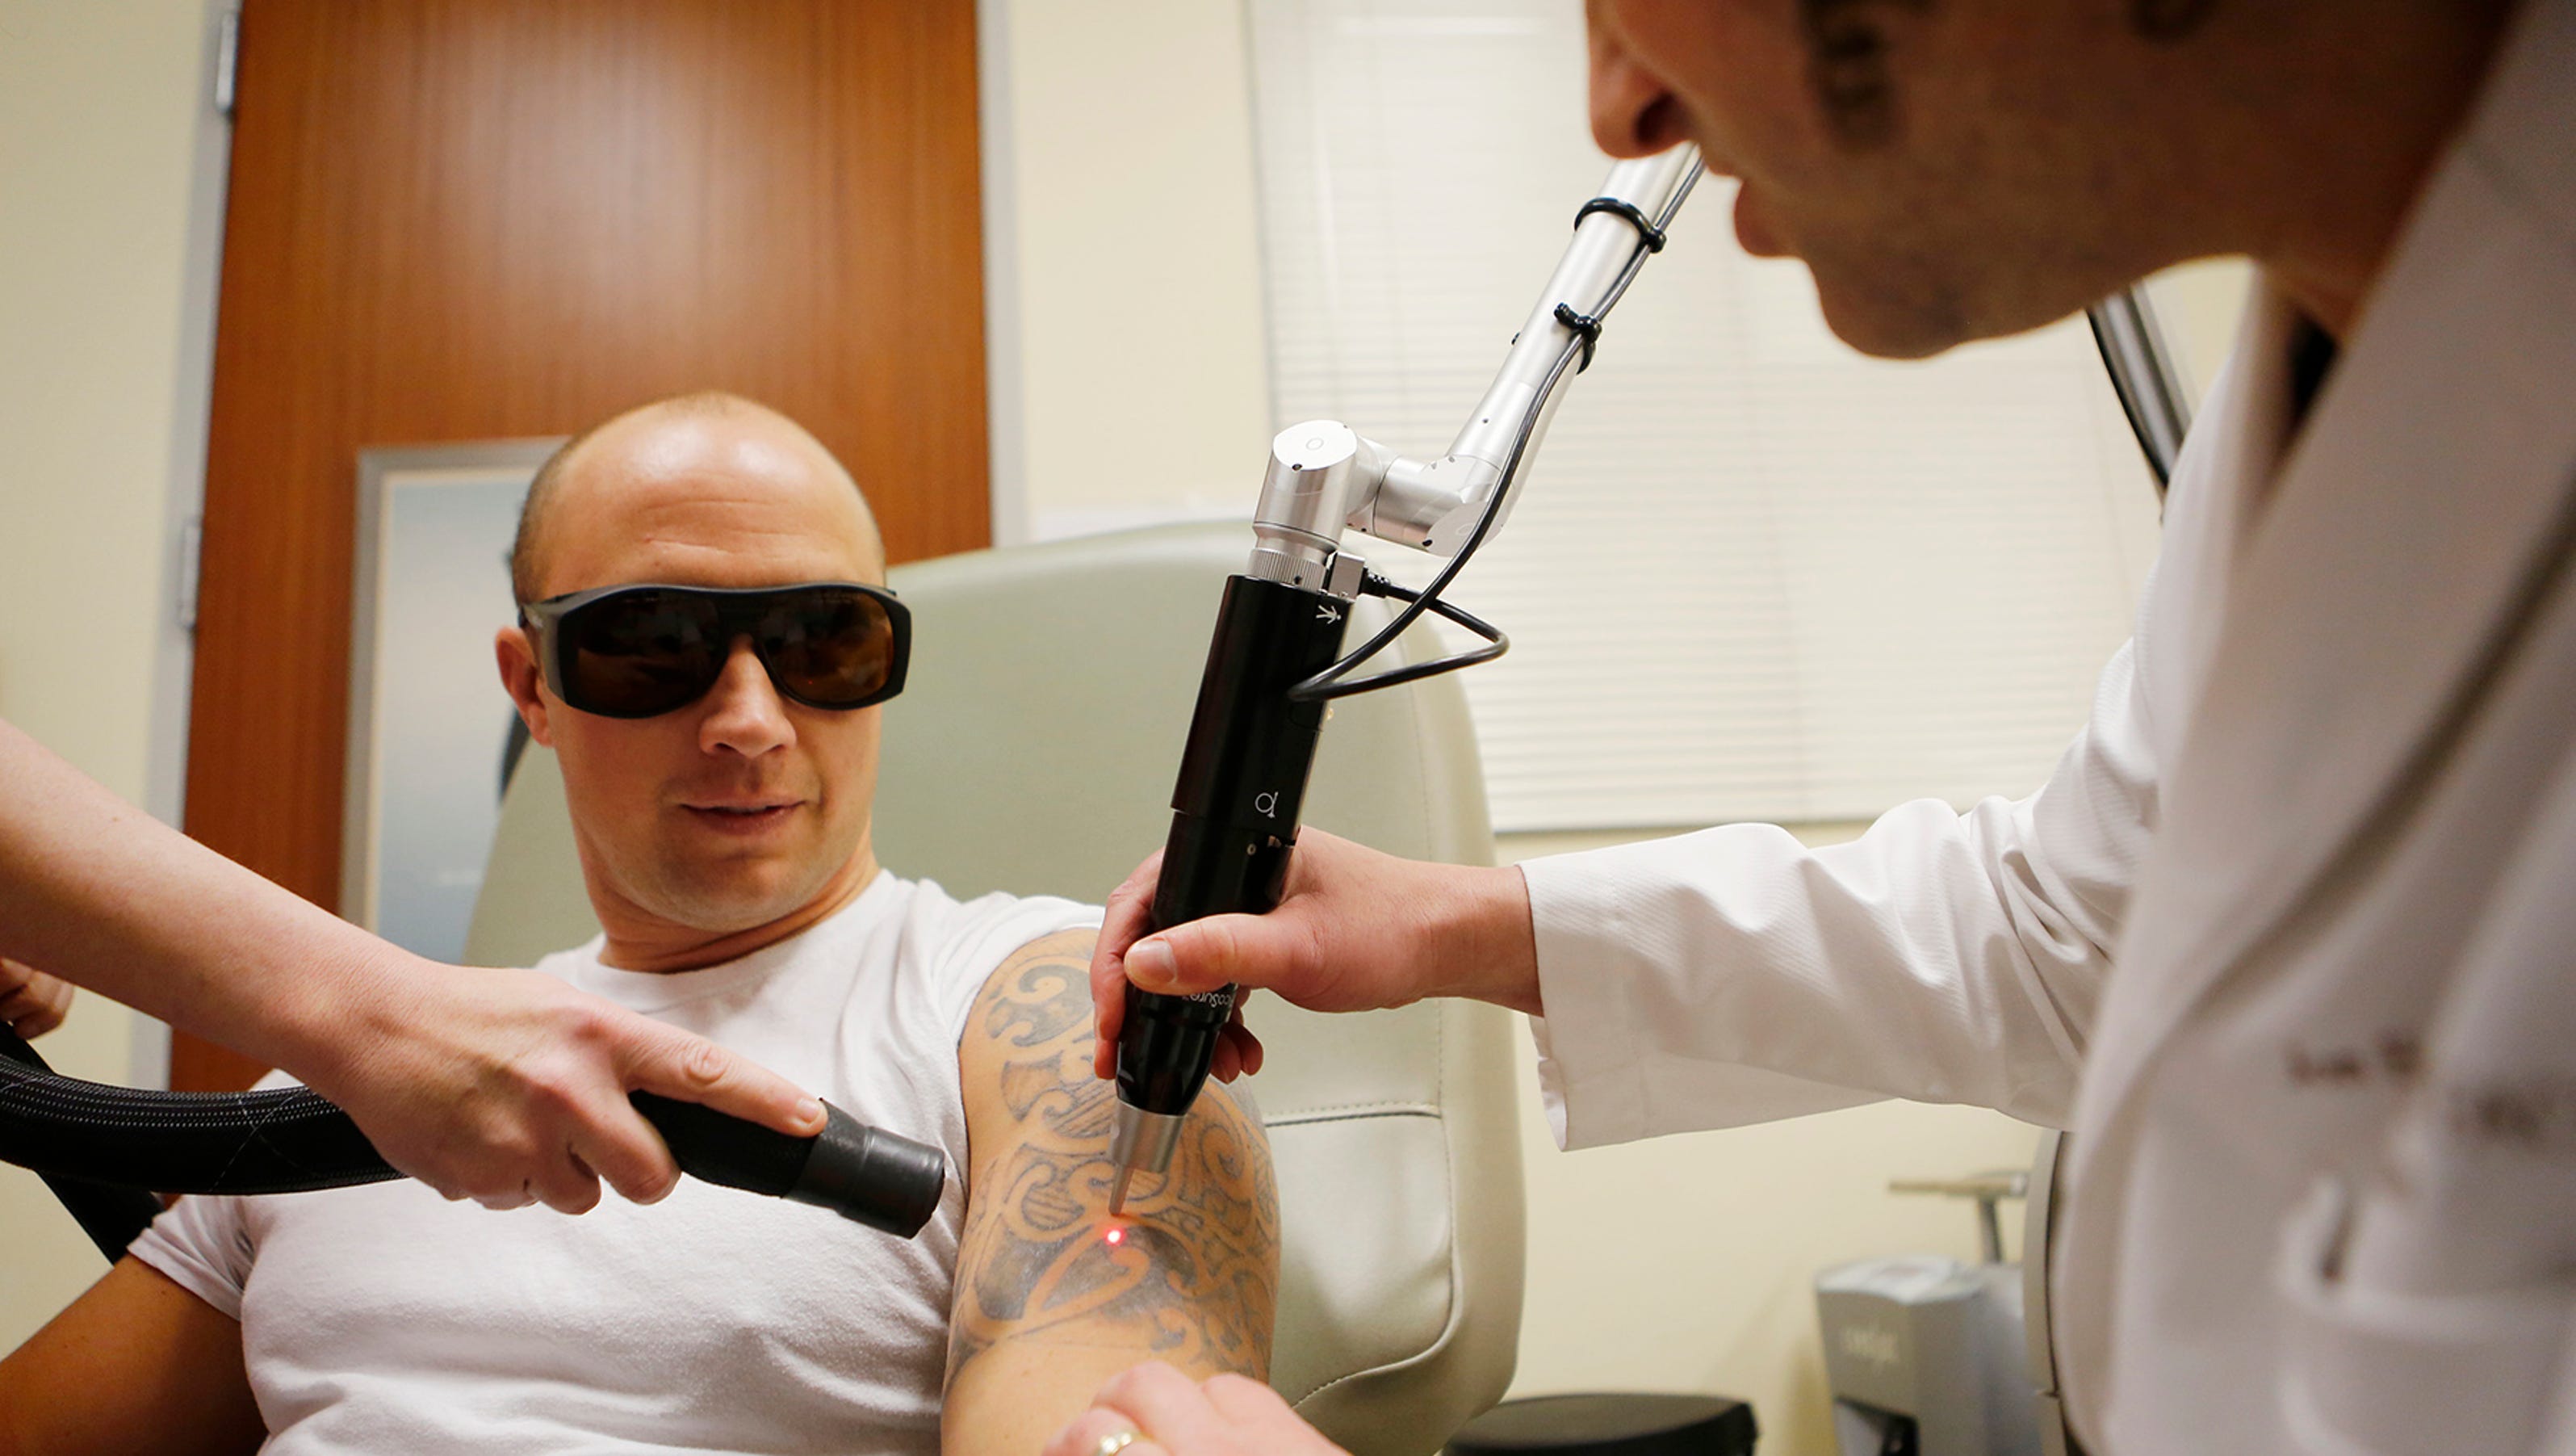 Tattoo removal takes laser leap forward